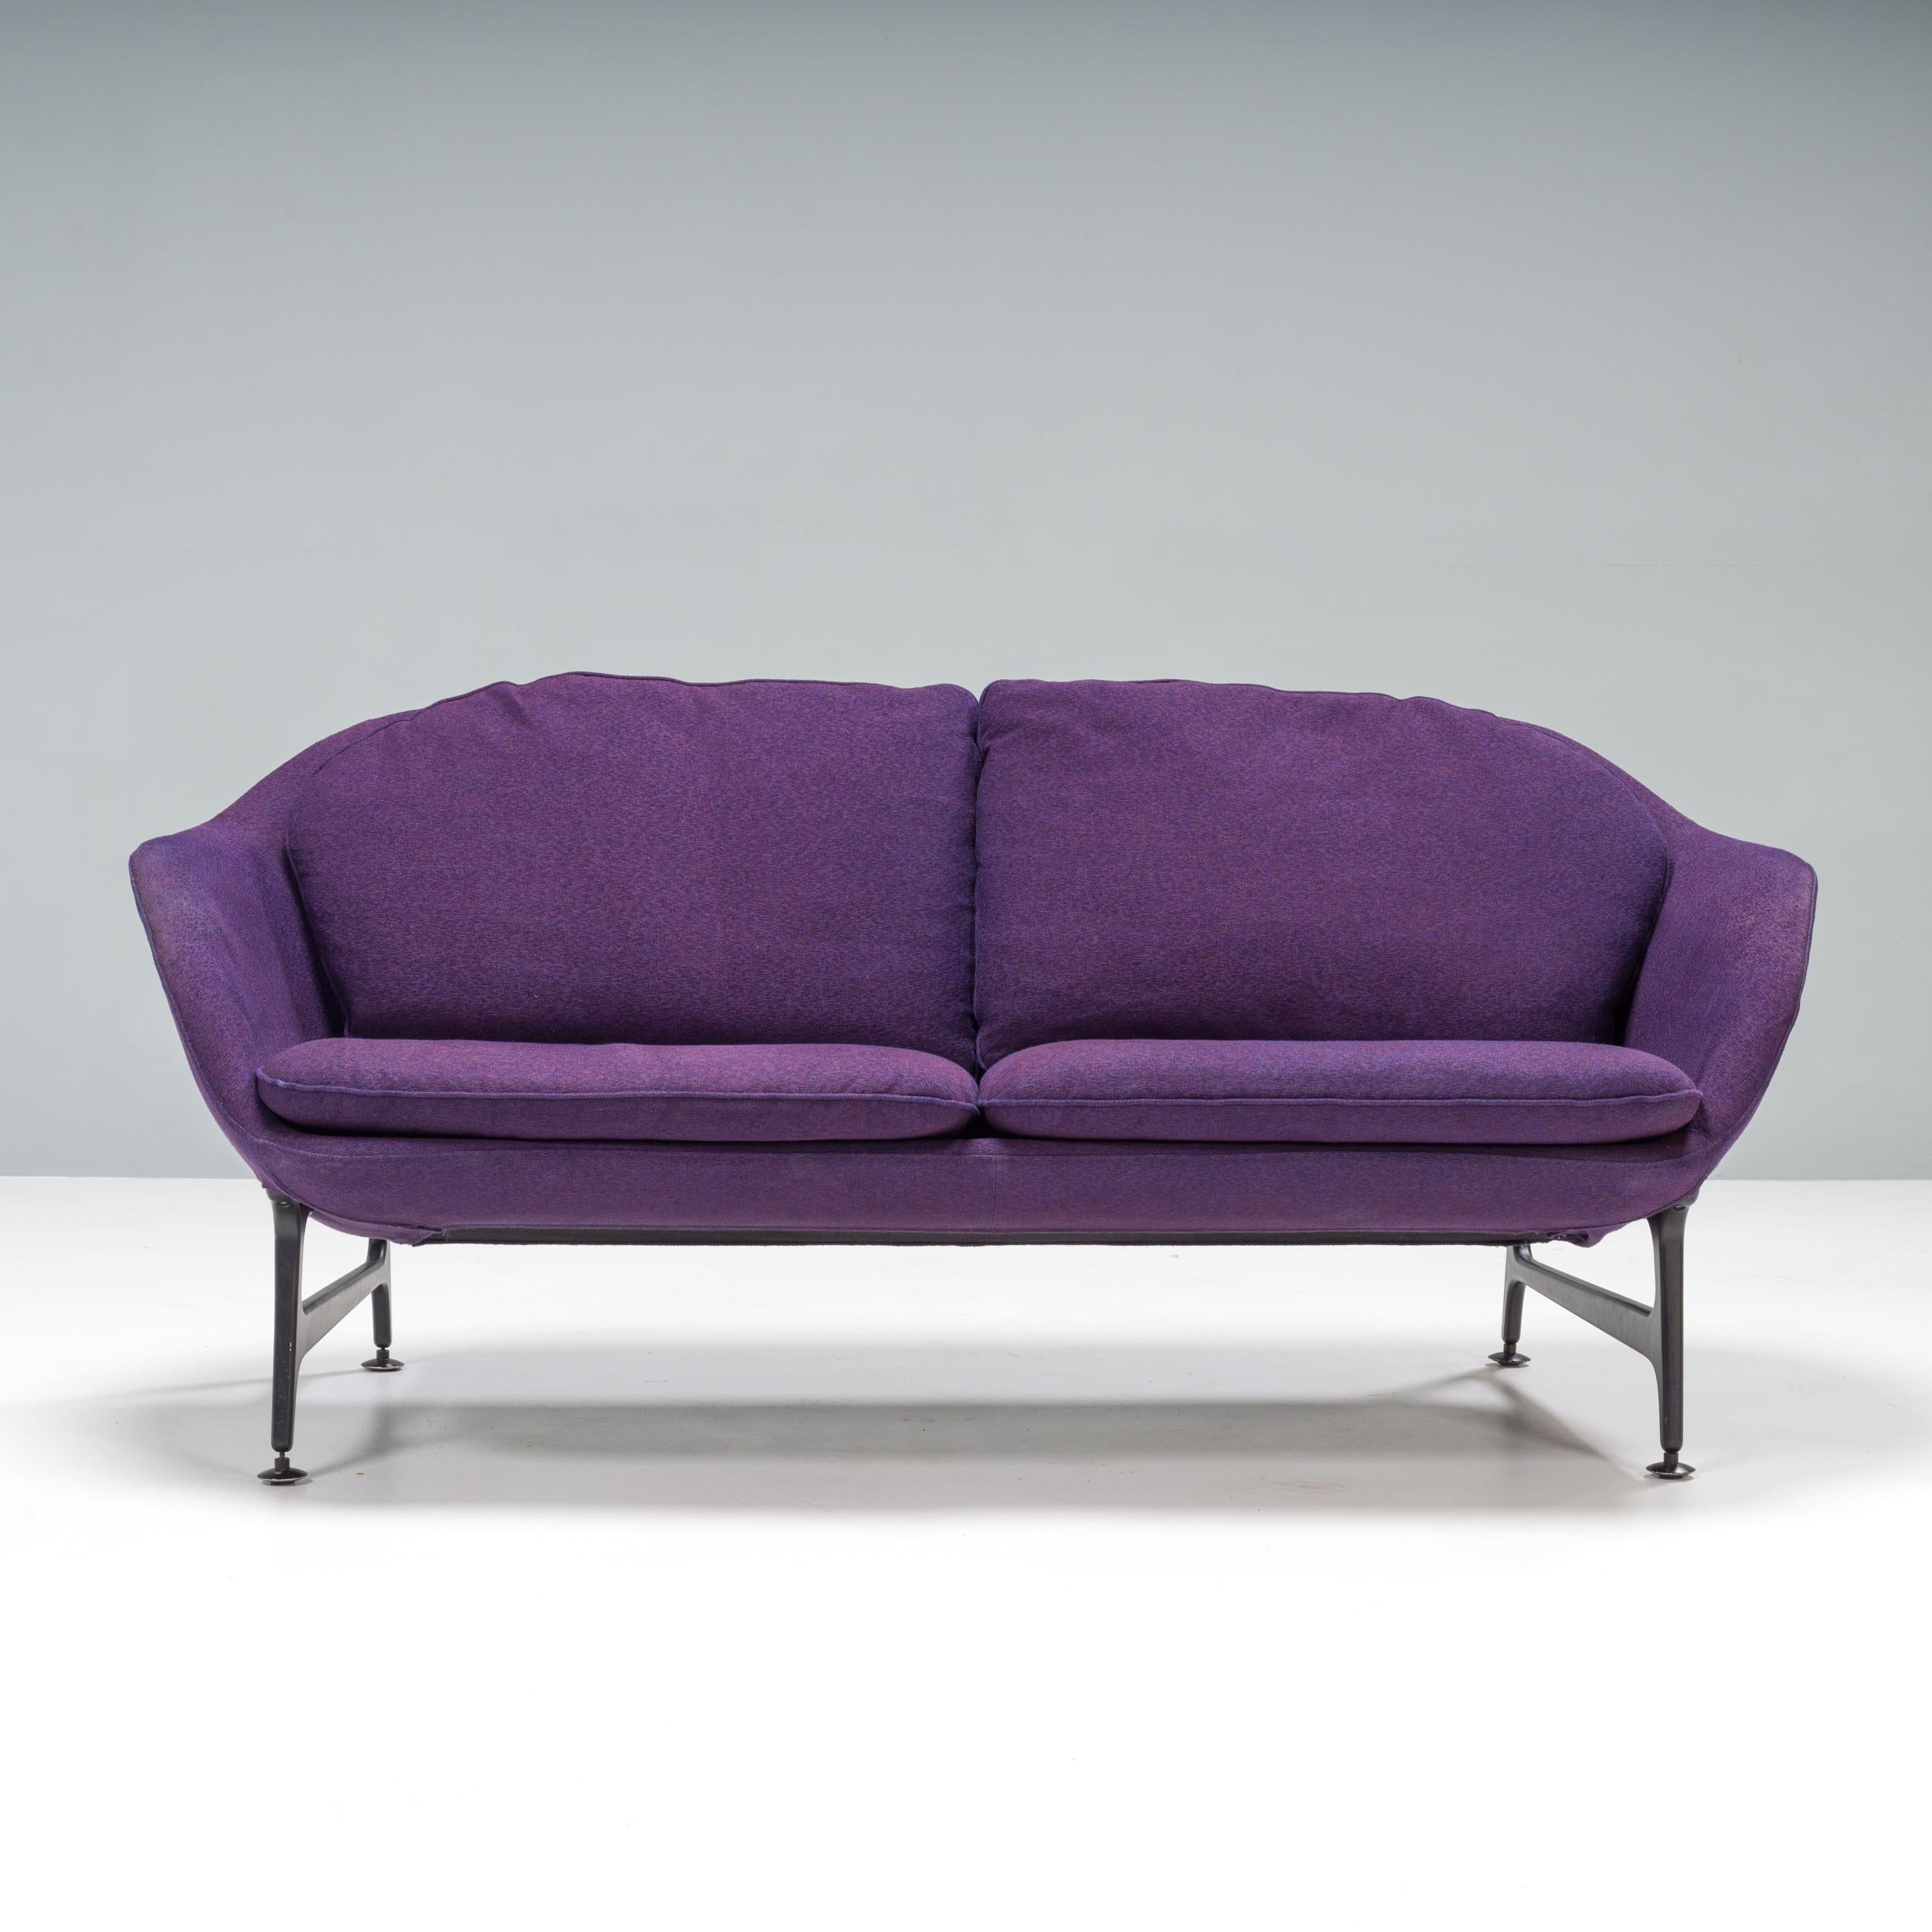 Italian Cassina by Jaime Hayon Vico Purple Sofa and Armchairs, Set of 3 For Sale